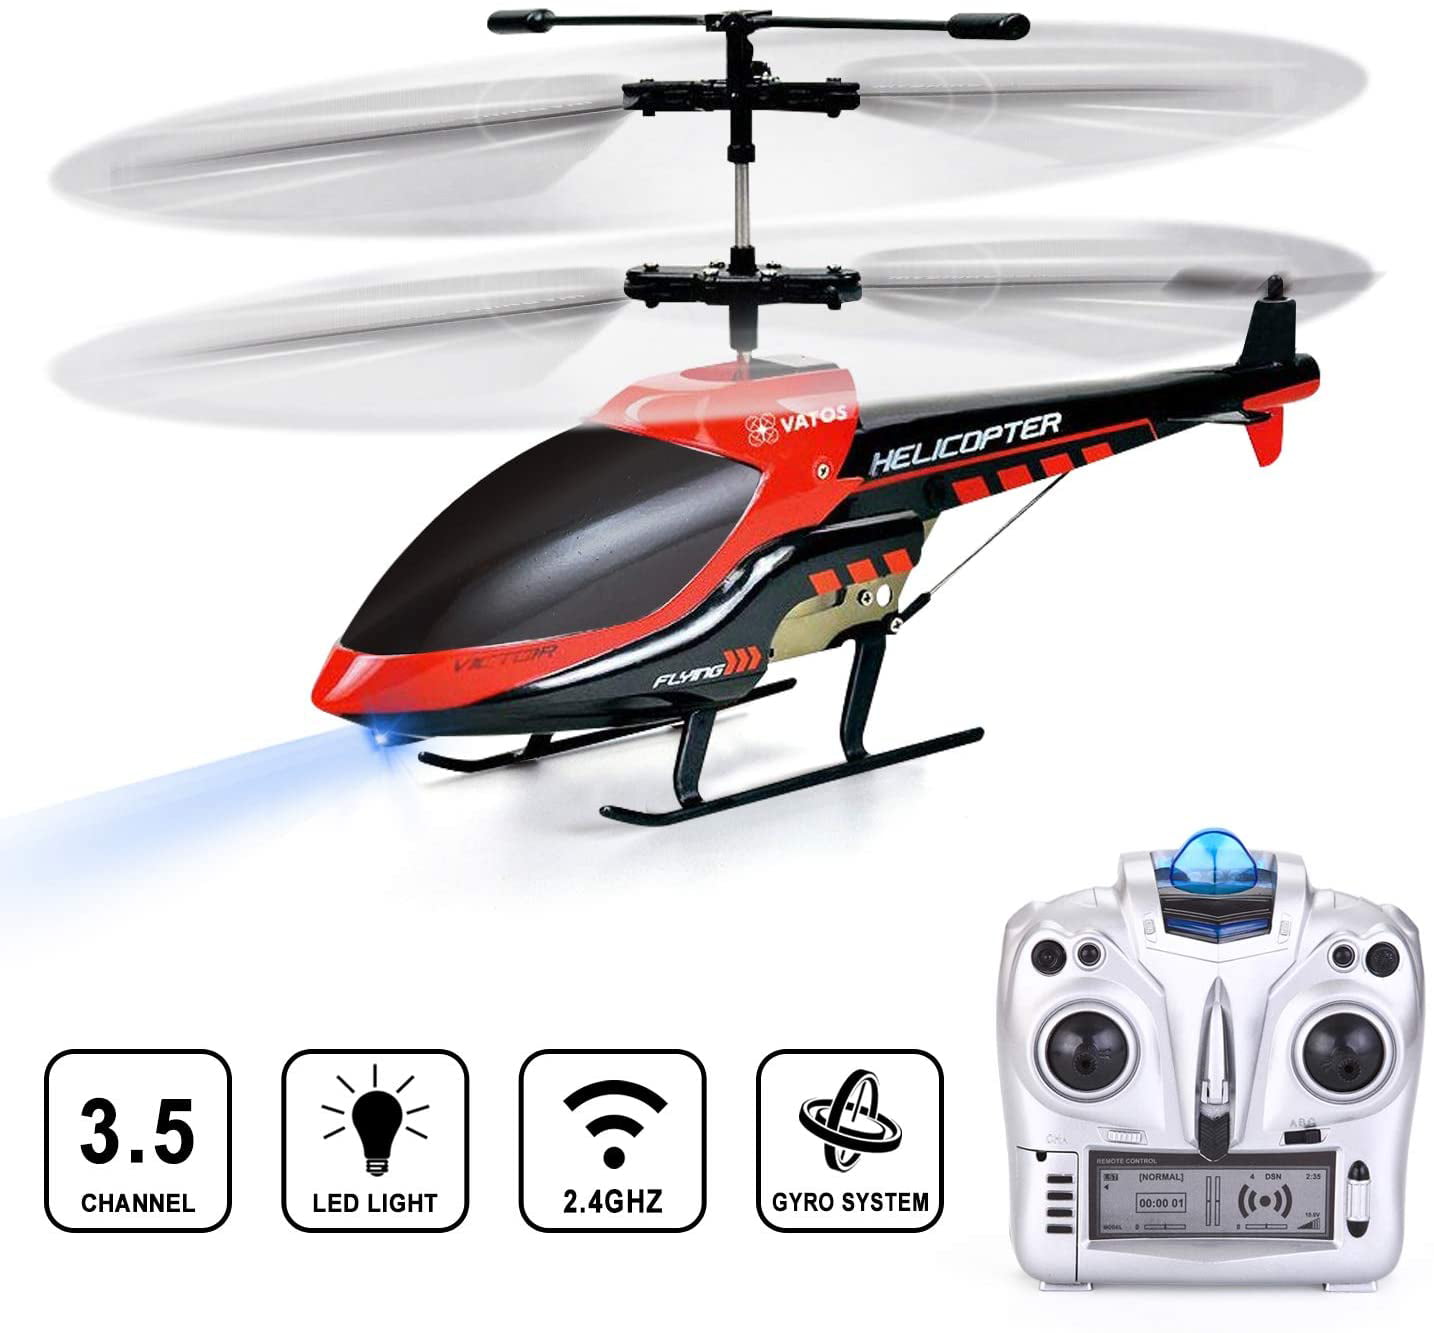 3.5 Channel Mini Helicopter,Remote Control for Kids & Adult Indoor Outdoor RC Helicopter Best Helicopter Toy Gift,Gray RC Helicopter with Gyro and LED Light 